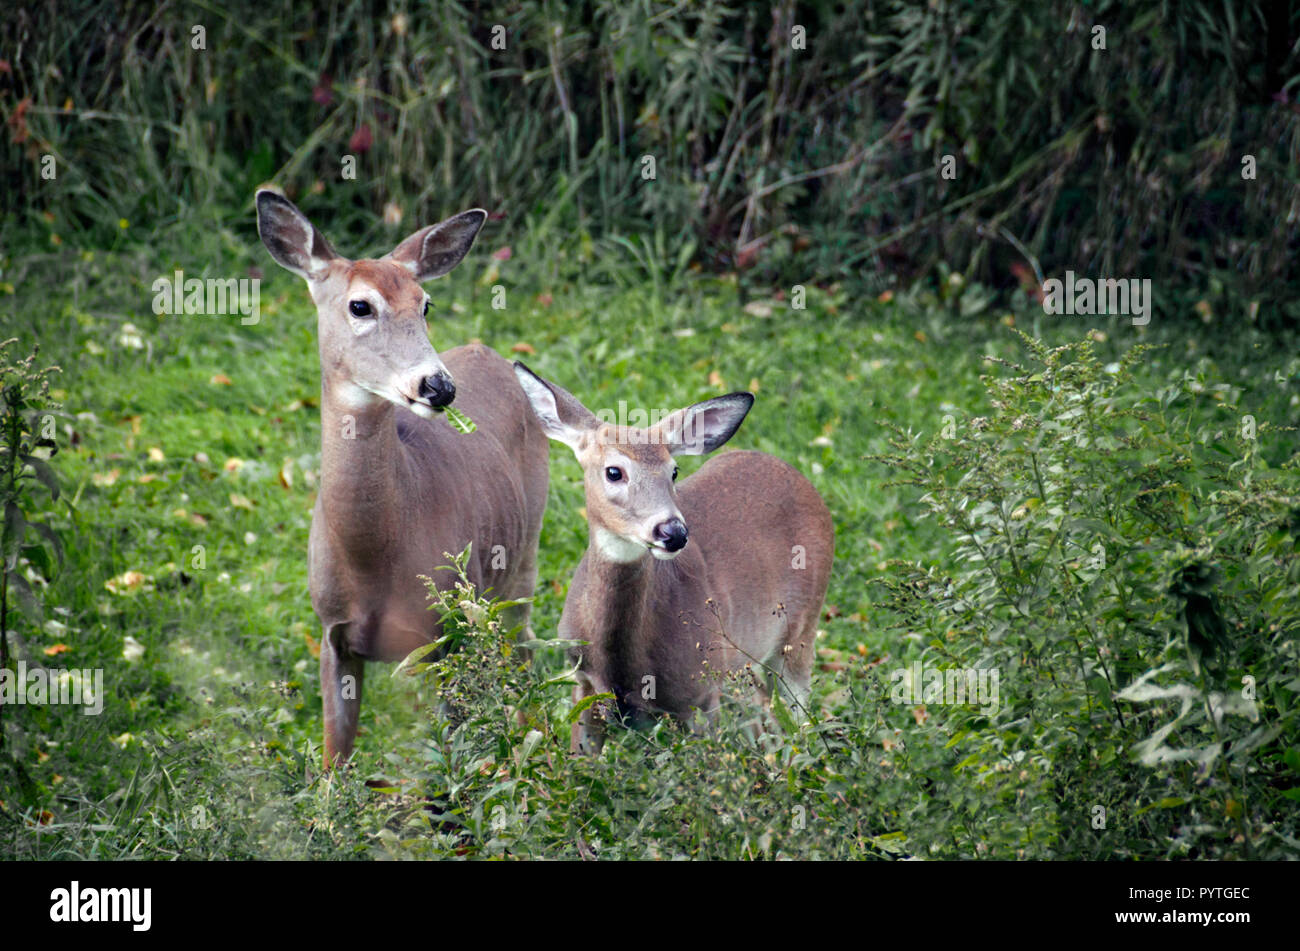 Closeup of a mother and baby deer, doe and fawn, standing together in a grassy field Stock Photo